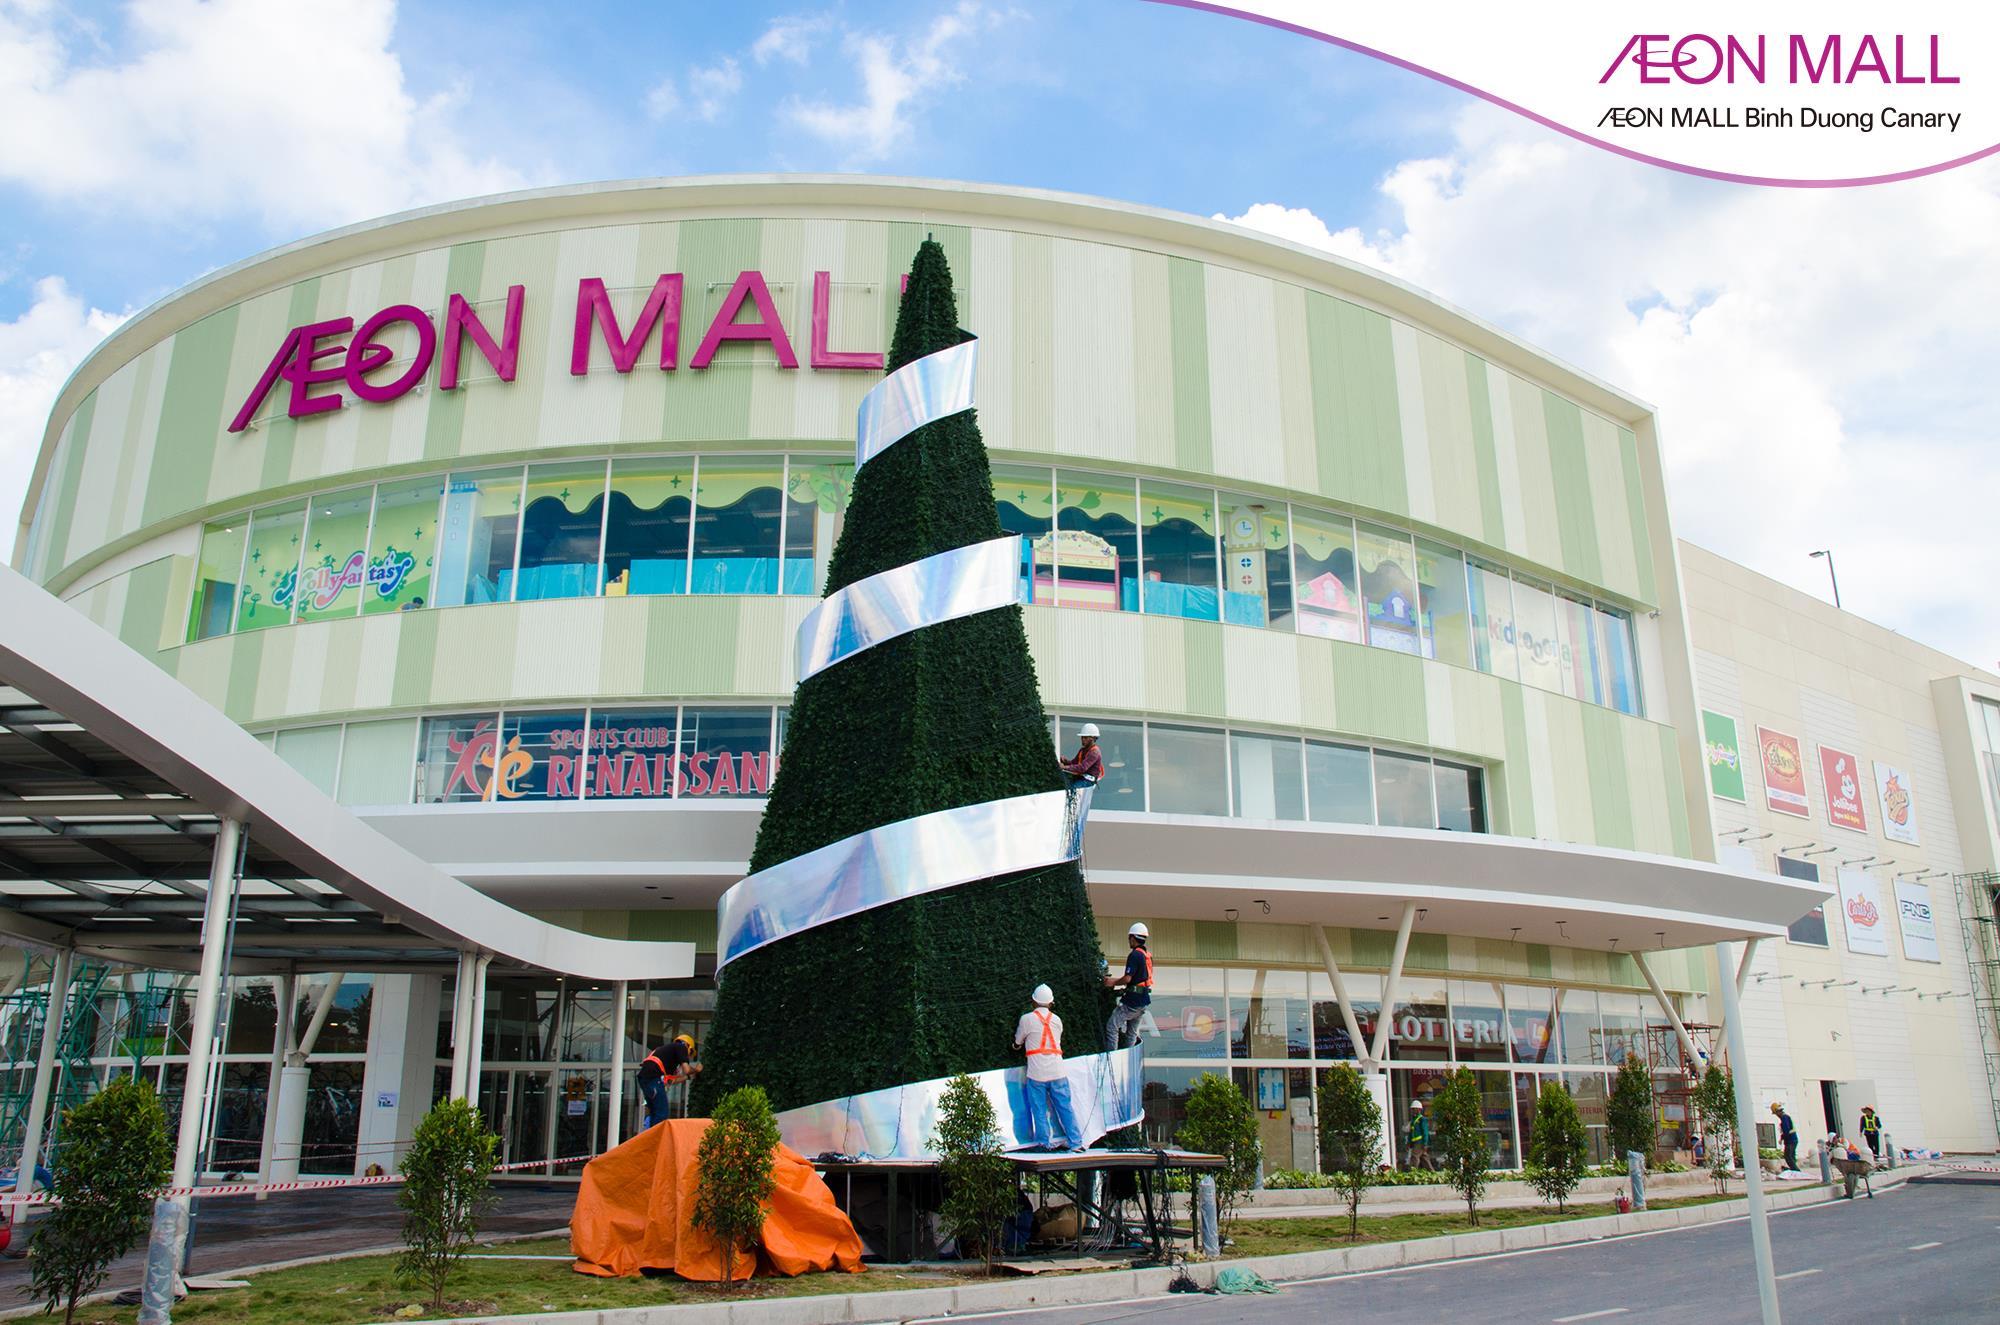 Second AEON mall to open in Hanoi | Investing | Funds and Investment